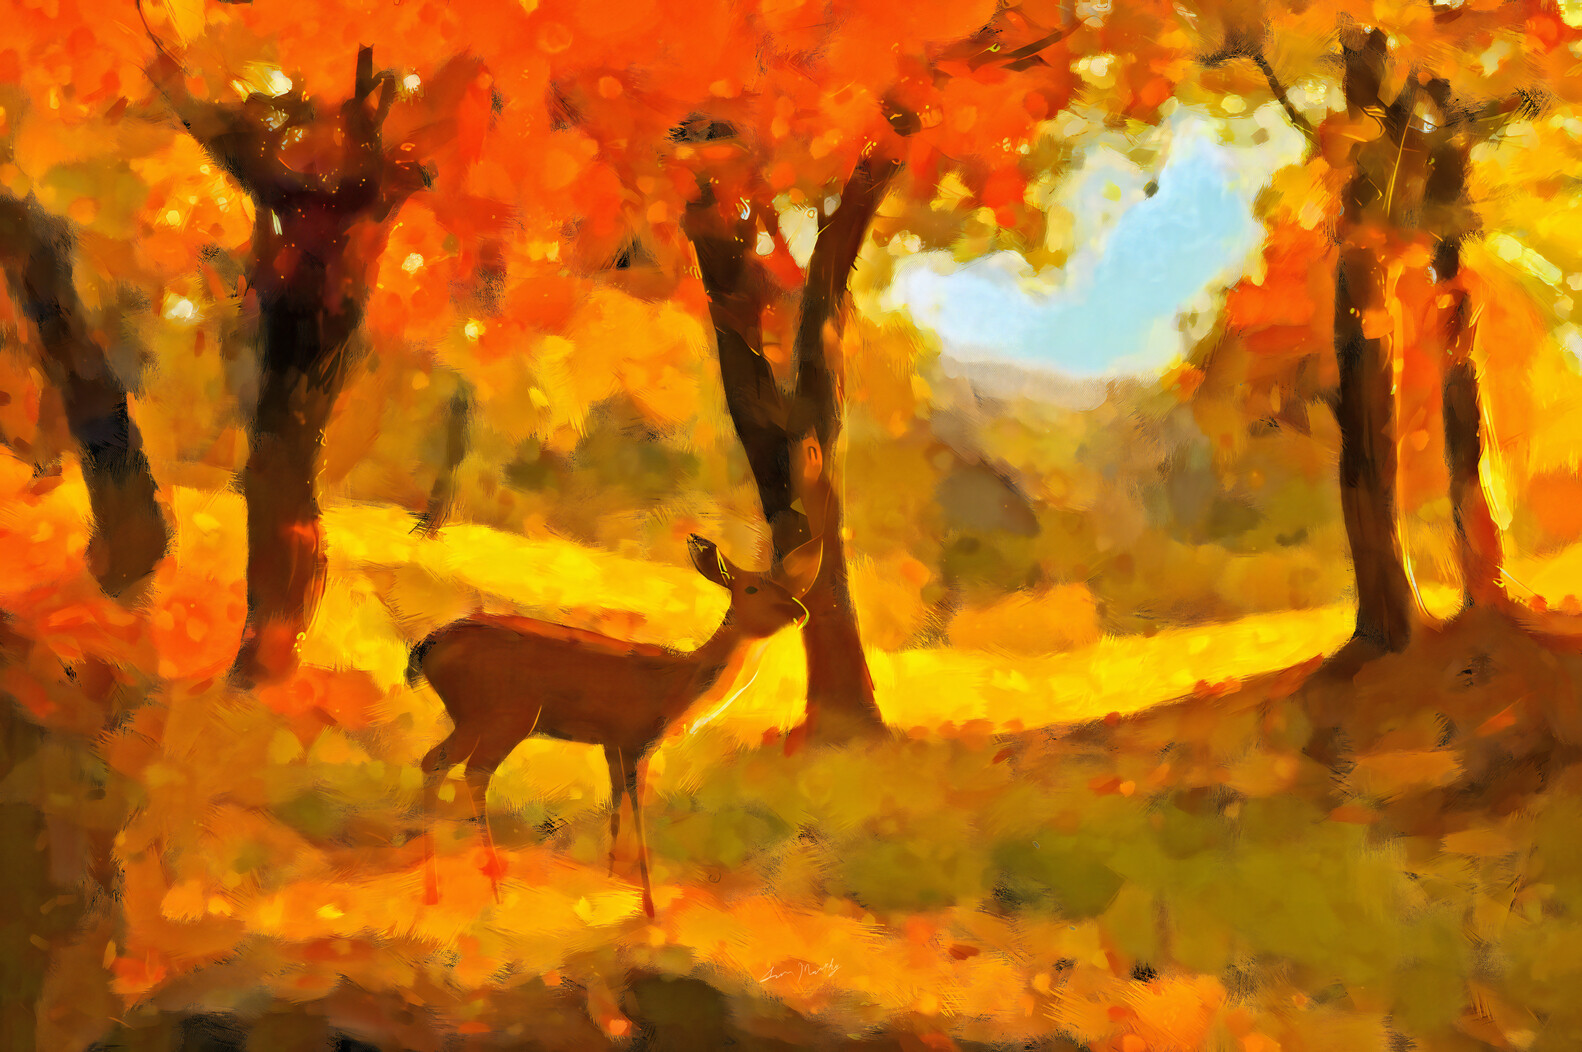 Deer in the Autumn Forest